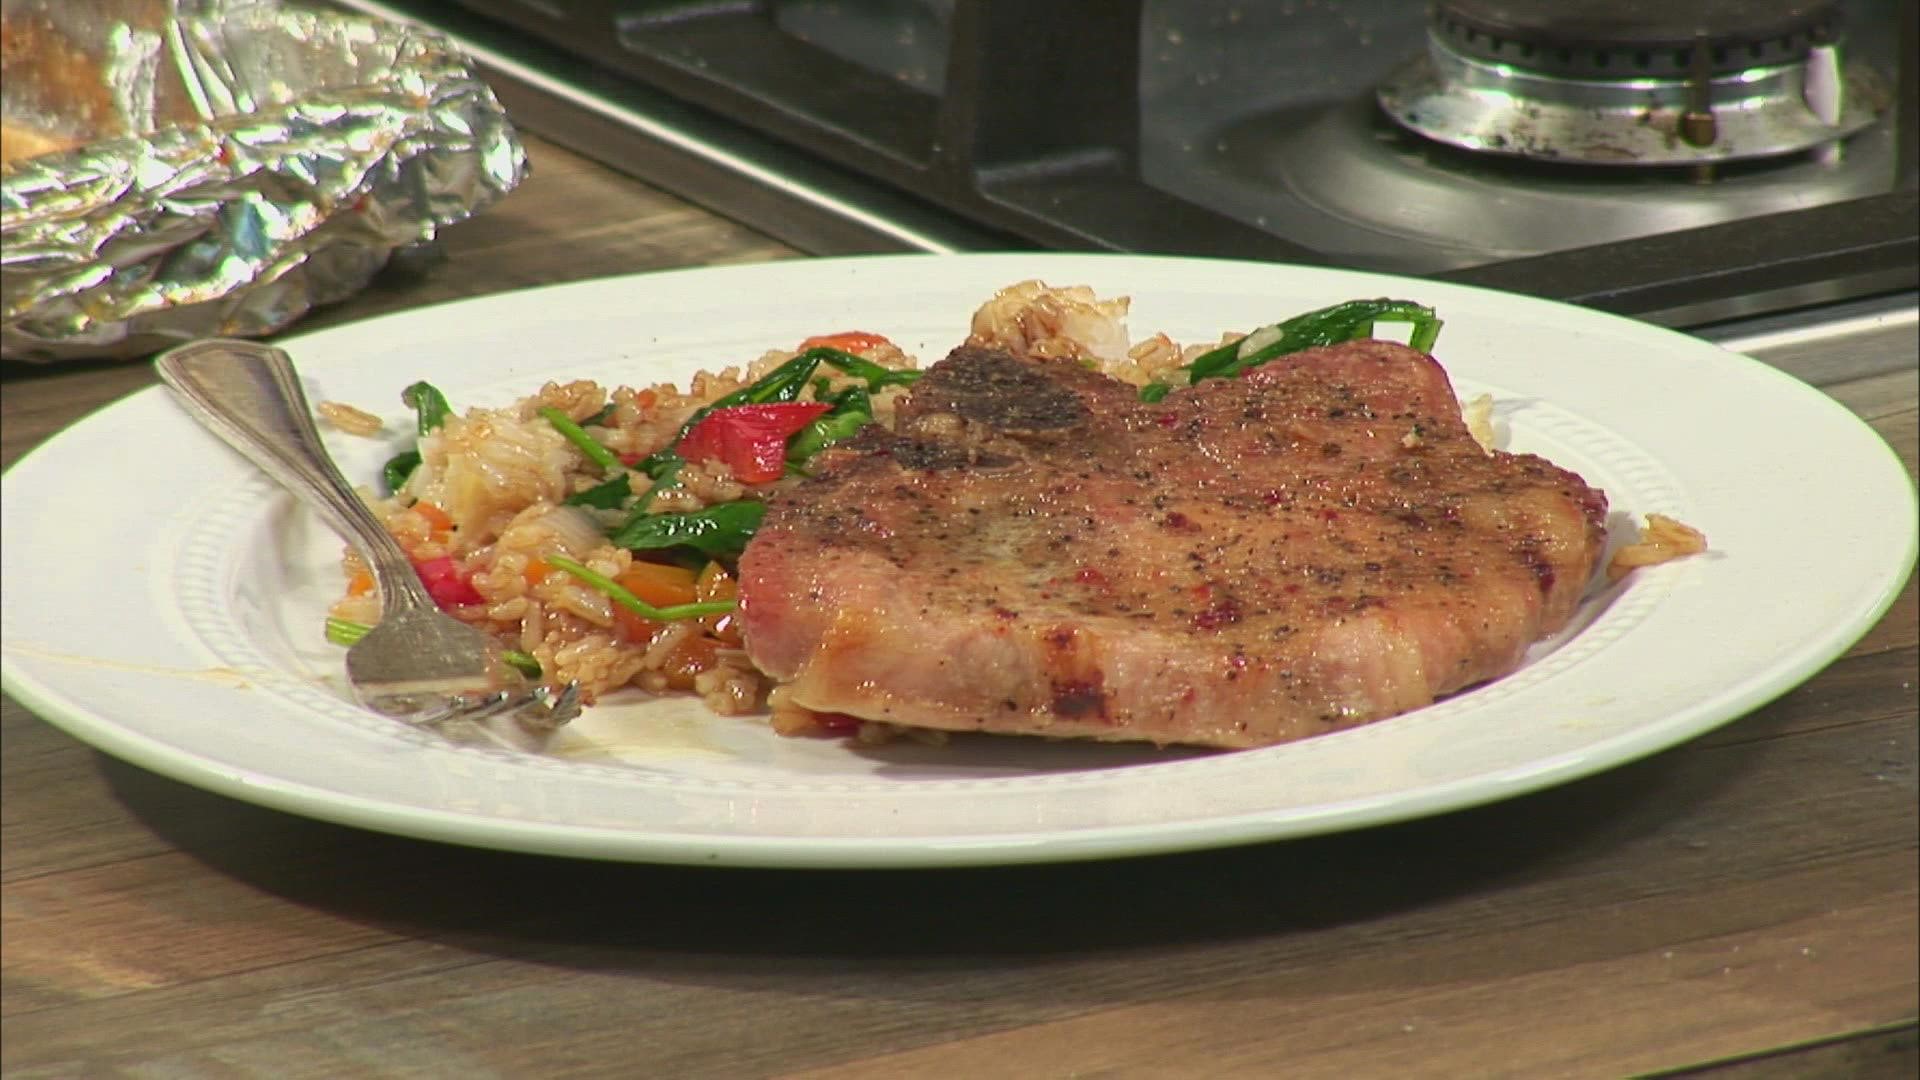 Chef Lynn Archer shows us how to make a healthy meal without breaking the bank.